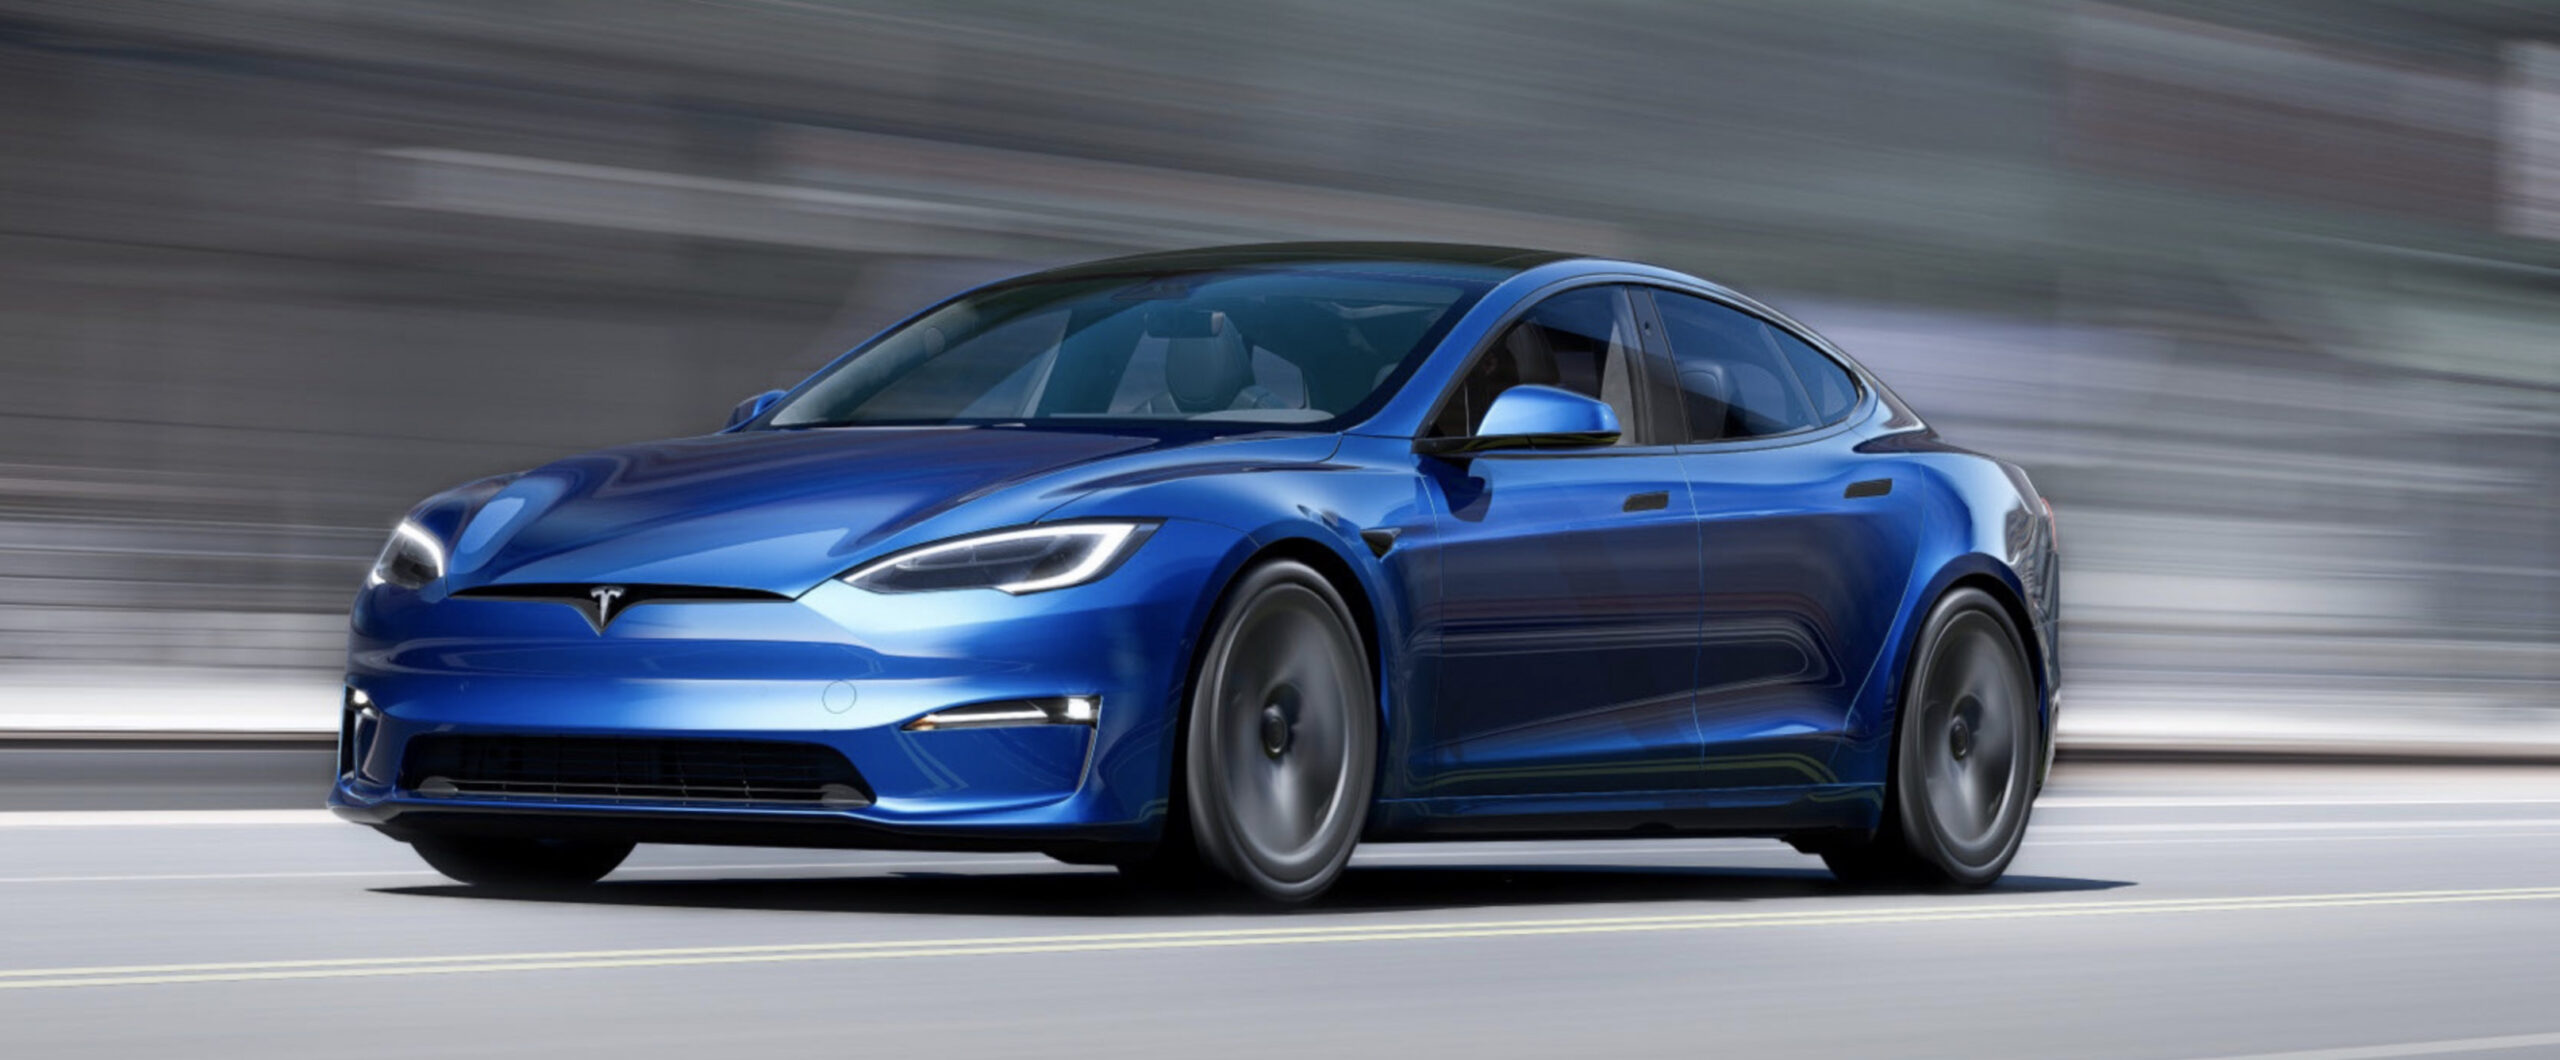 Tesla new Model S/X refresh: 3 new features yet to be announced  - tesla model x refresh